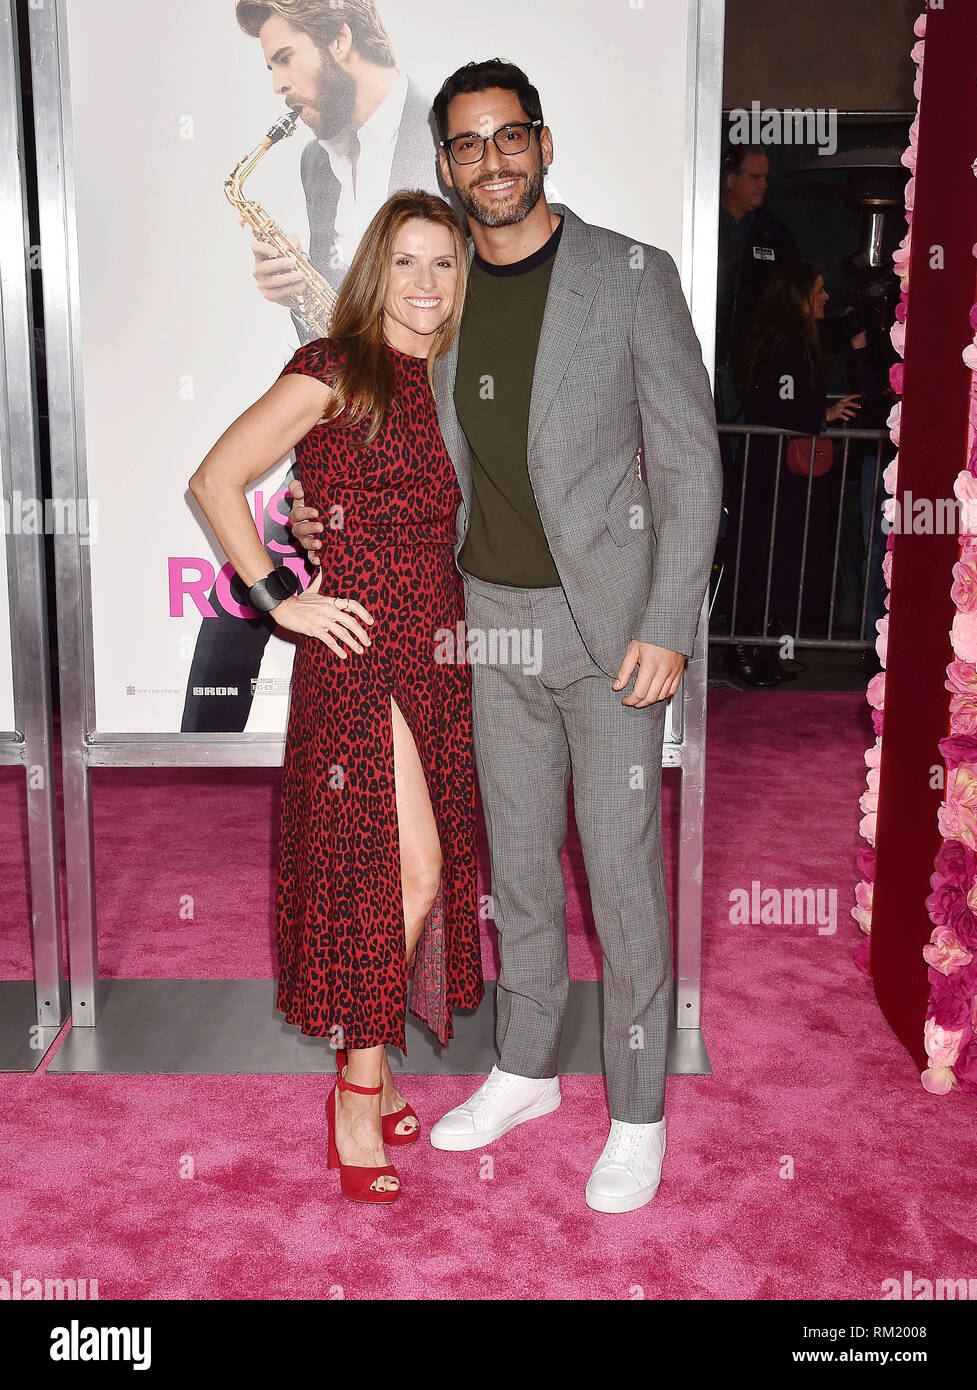 LOS ANGELES, CA FEBRUARY 11: Gina Matthews (L) Tom Ellis arrive at the Premiere Of Warner Bros. Pictures' 'Isn't It Romantic' at The Theatre at Stock Photo - Alamy